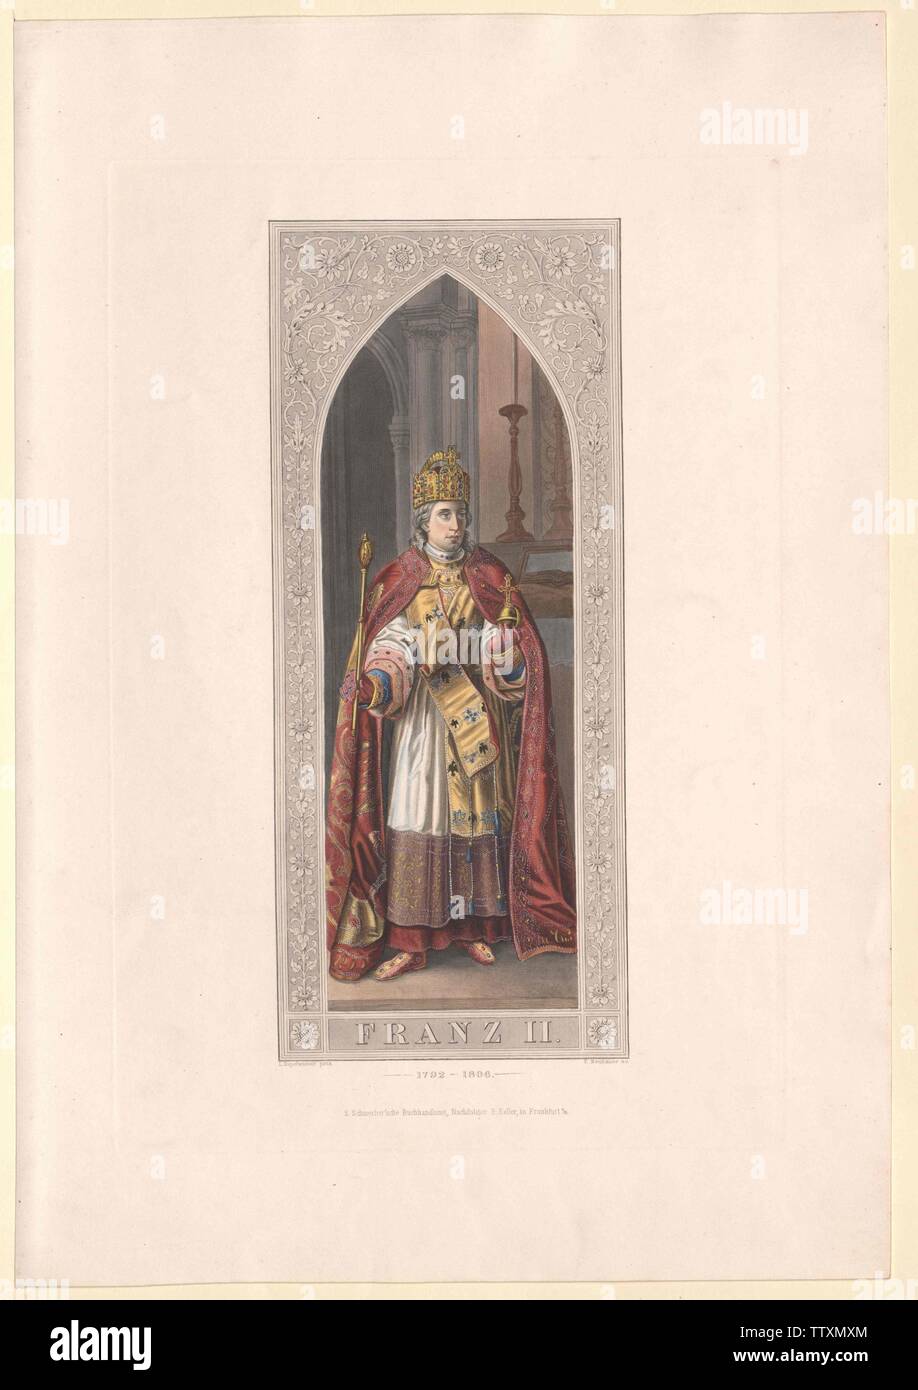 Francis II, Holy Roman Emperor, picture in the coronation robes of the sanctify Roman empire. coloured engraving by Frederick Louis Neubauer based on the painting by Leopold Kupelwieser for the emperor's hall in the Frankfurt Latins 1840, Additional-Rights-Clearance-Info-Not-Available Stock Photo